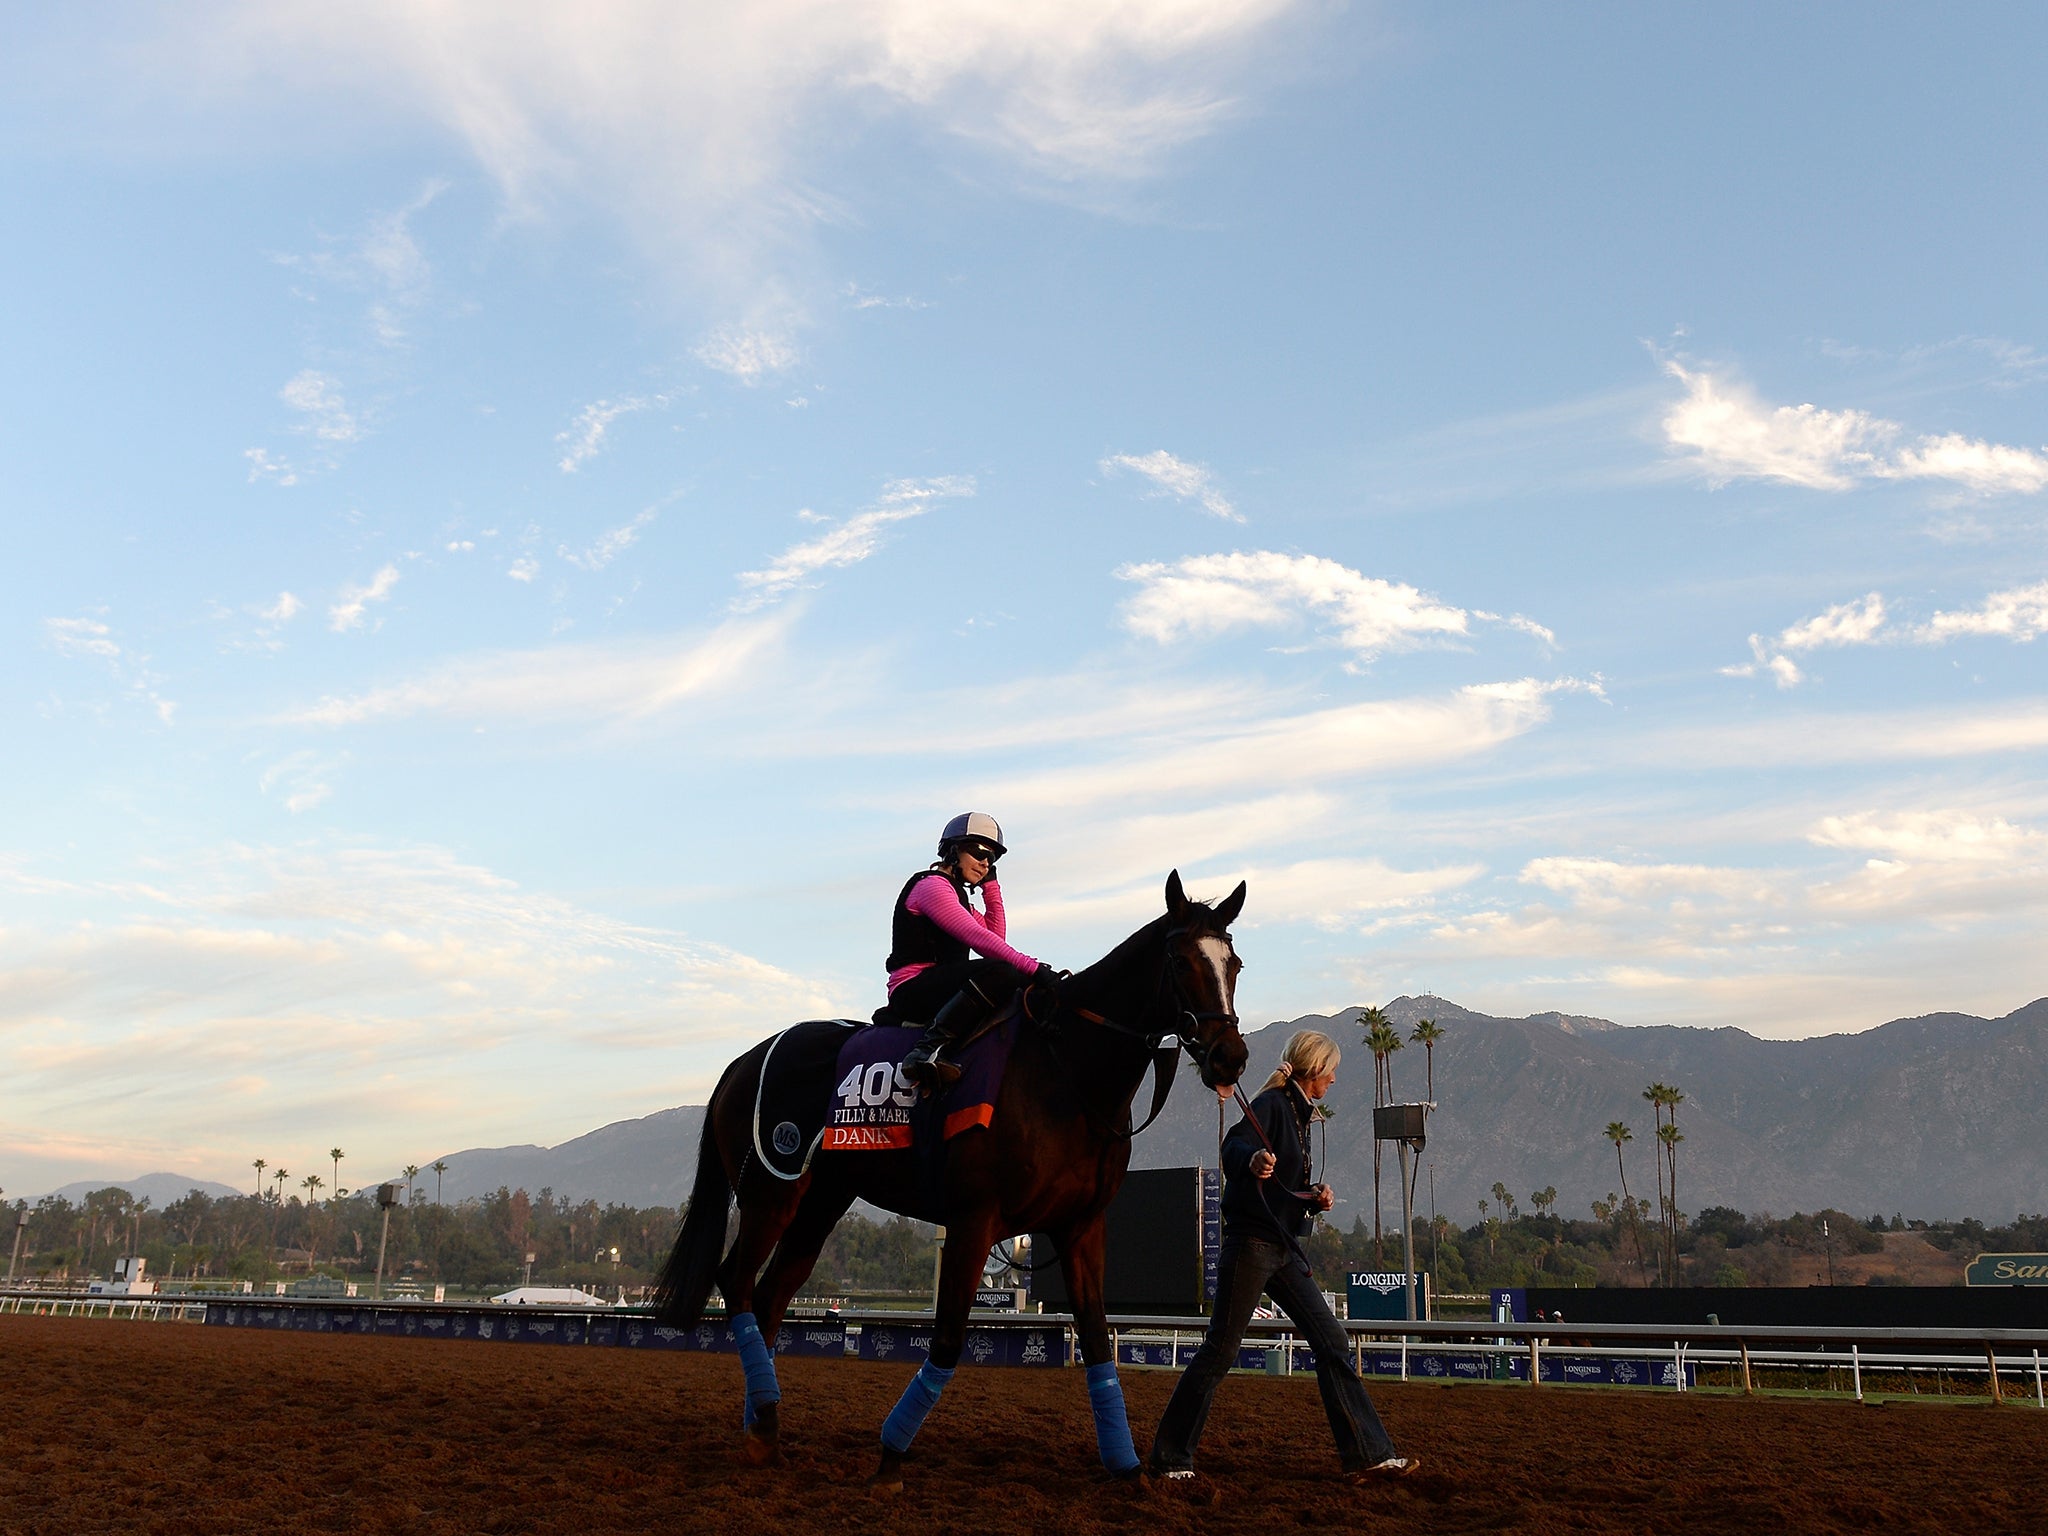 Dank is lead to train in preparation for the 2014 Breeder's Cup Filly & Mare Turf at Santa Anita Park